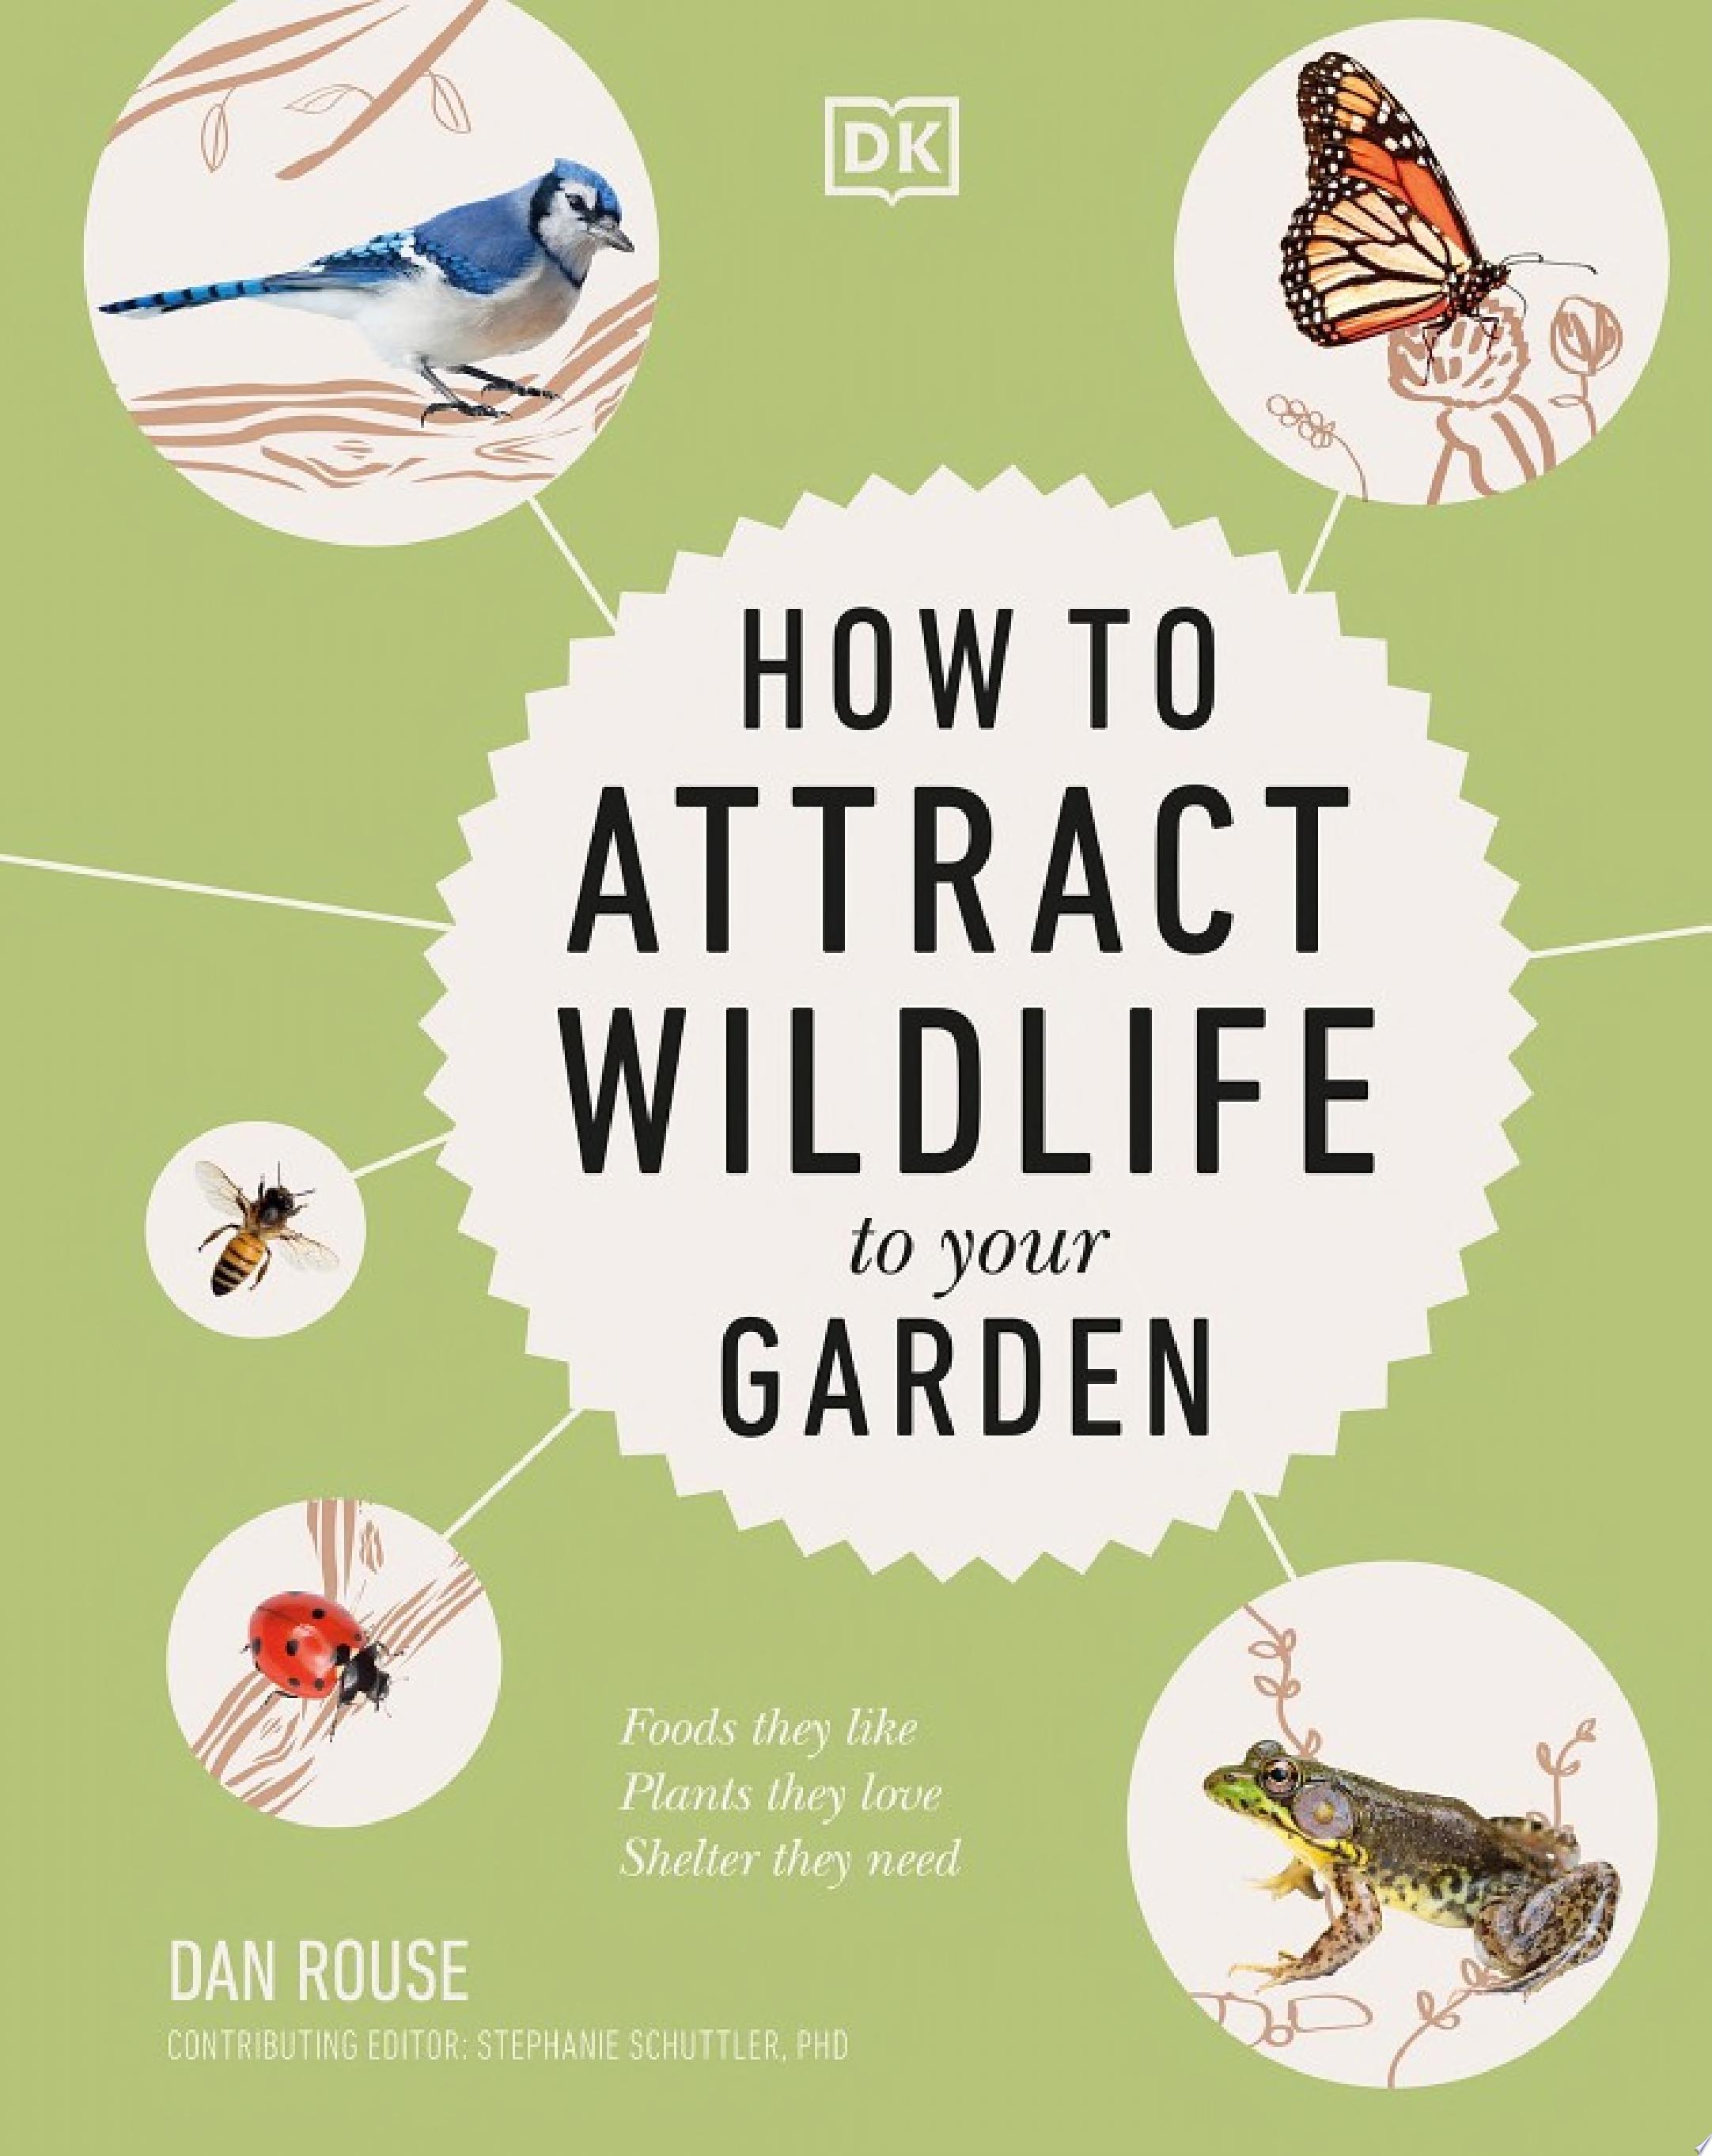 Image for "How to Attract Wildlife to Your Garden"